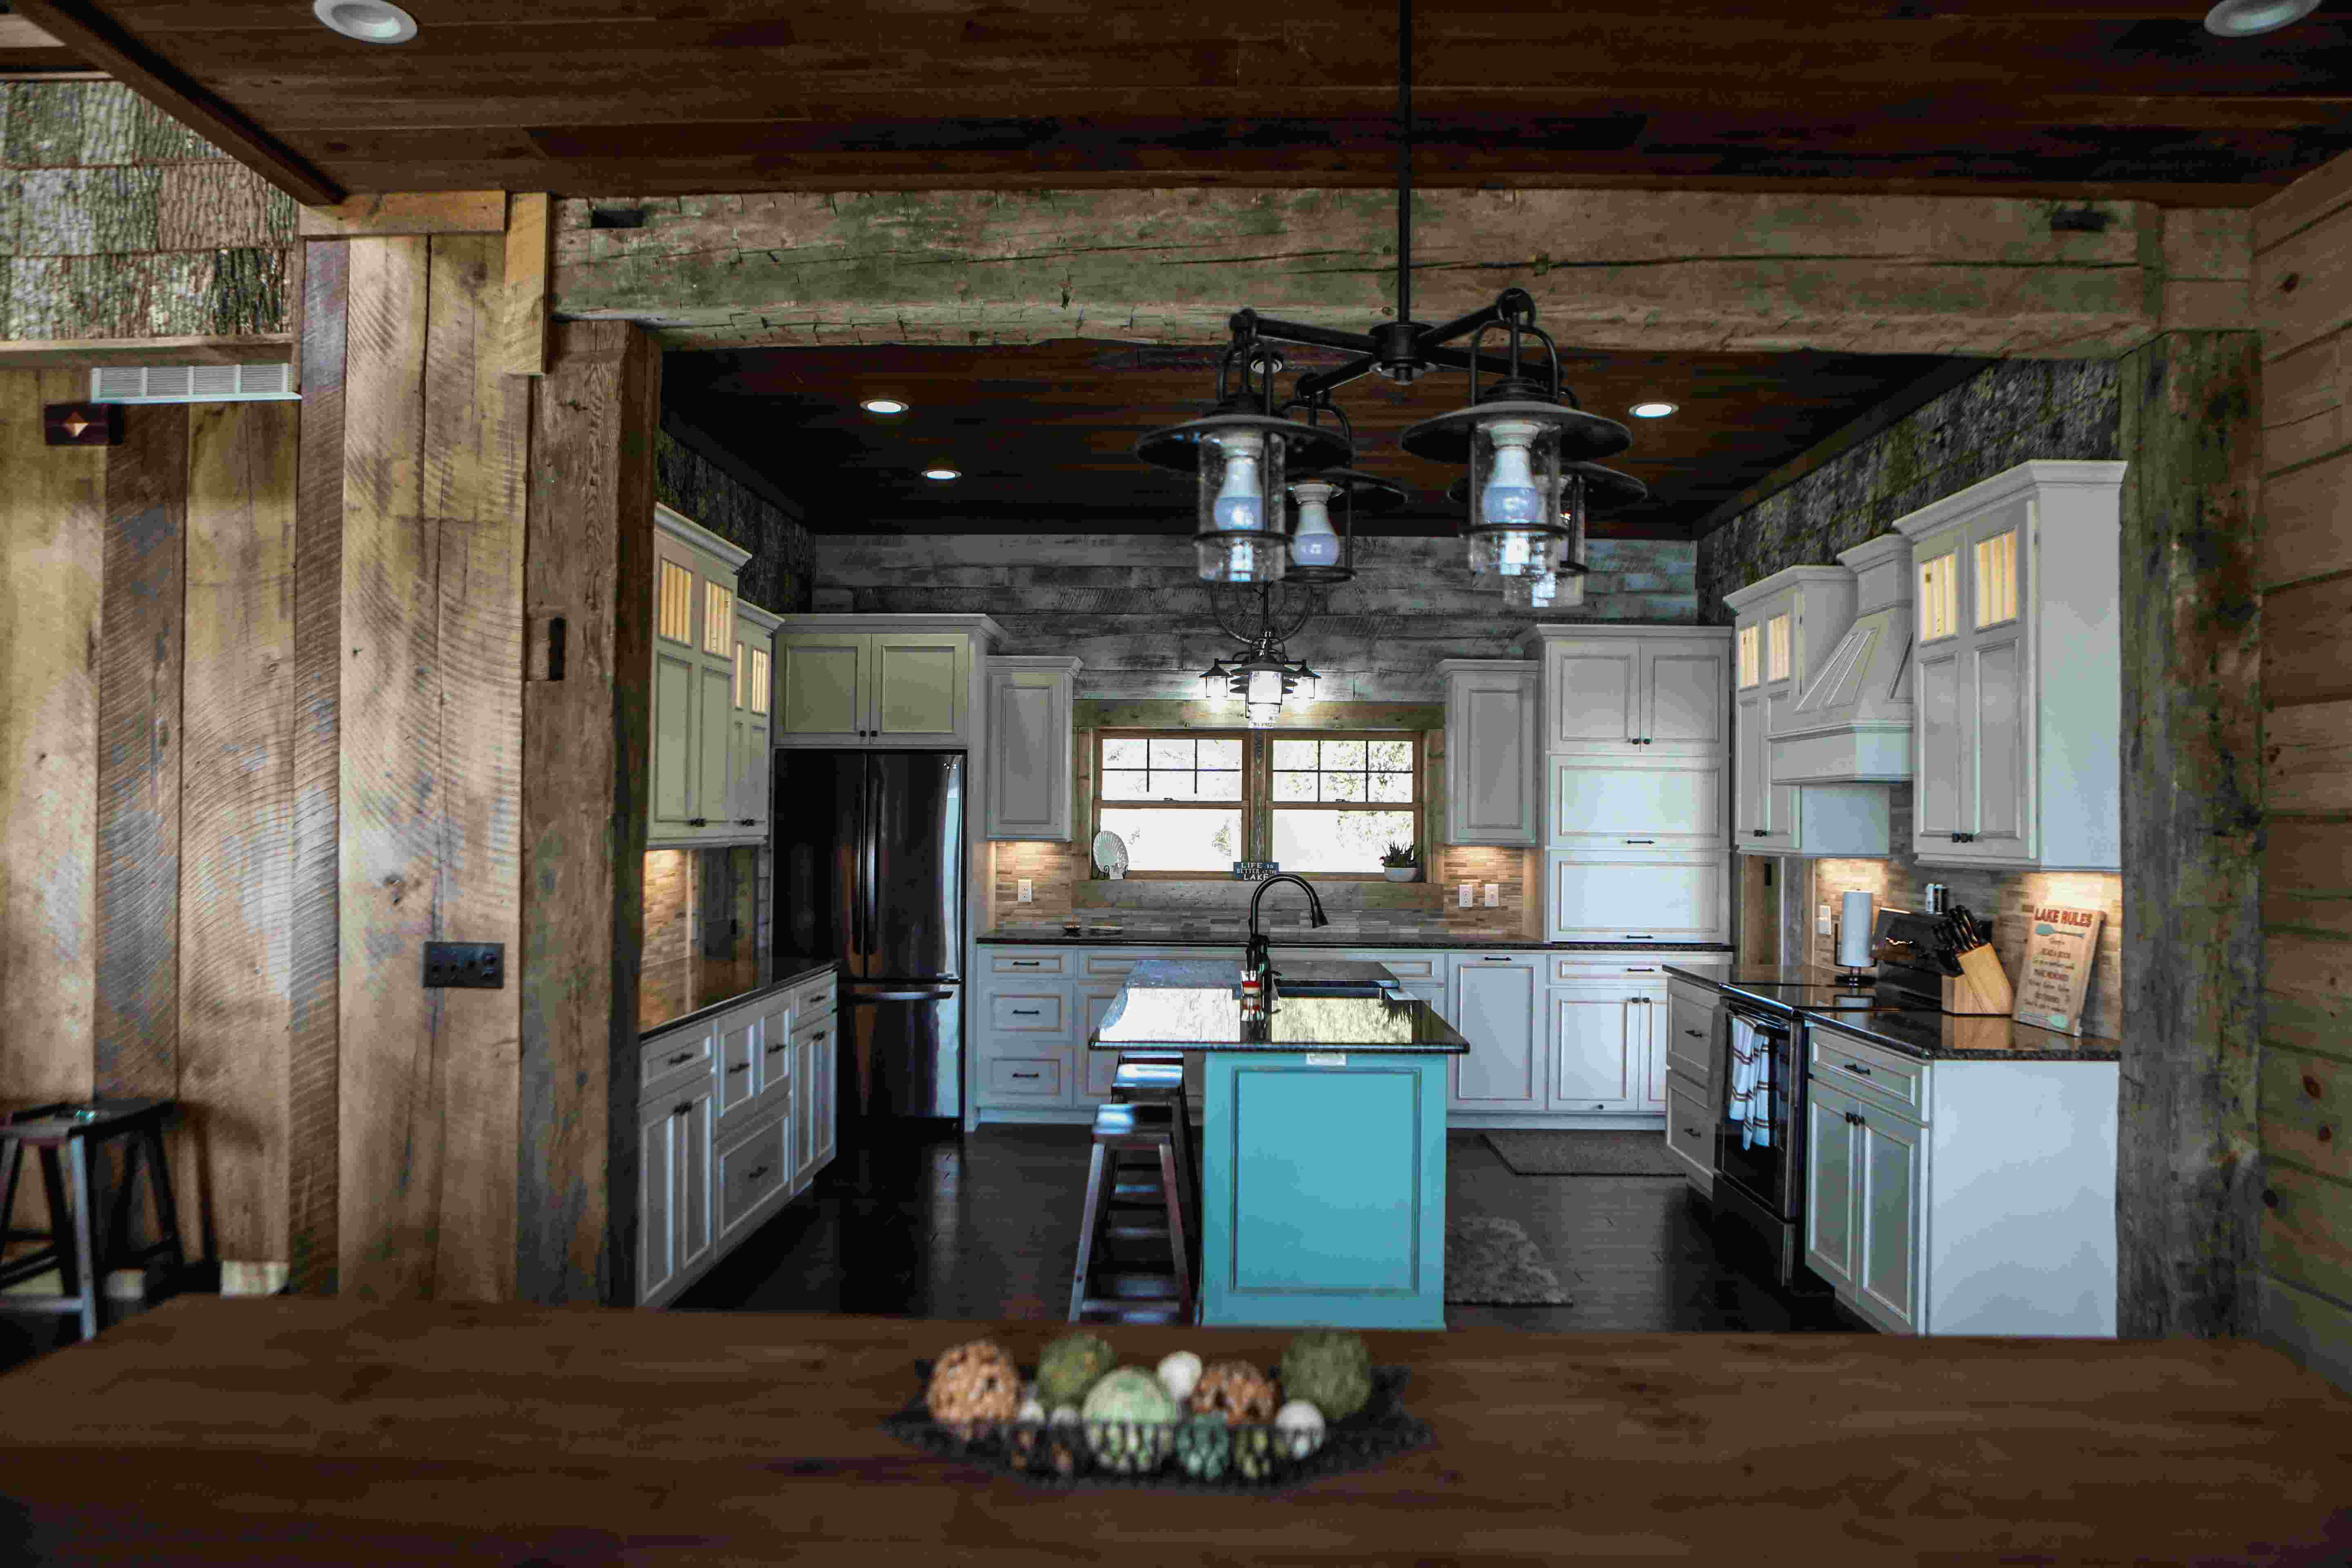 a modern lake house kitchen with rustic barn wood siding and cabin kitchen cabinets